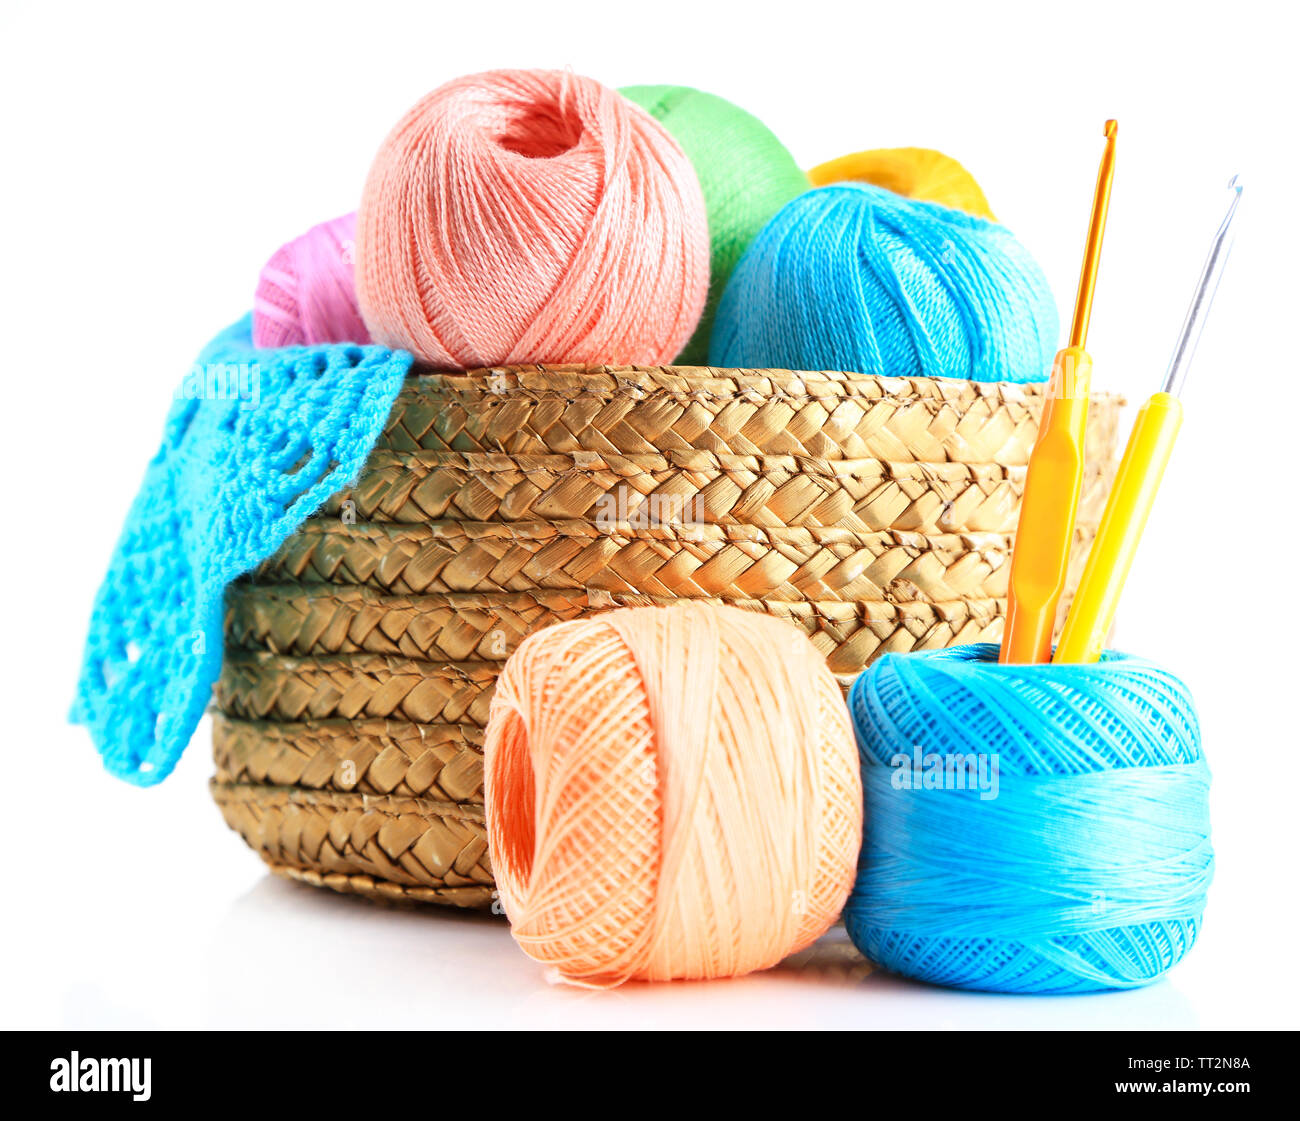 Multicolored Yarn In A Wicker Basket And Knitting Needles Stock Photo -  Download Image Now - iStock